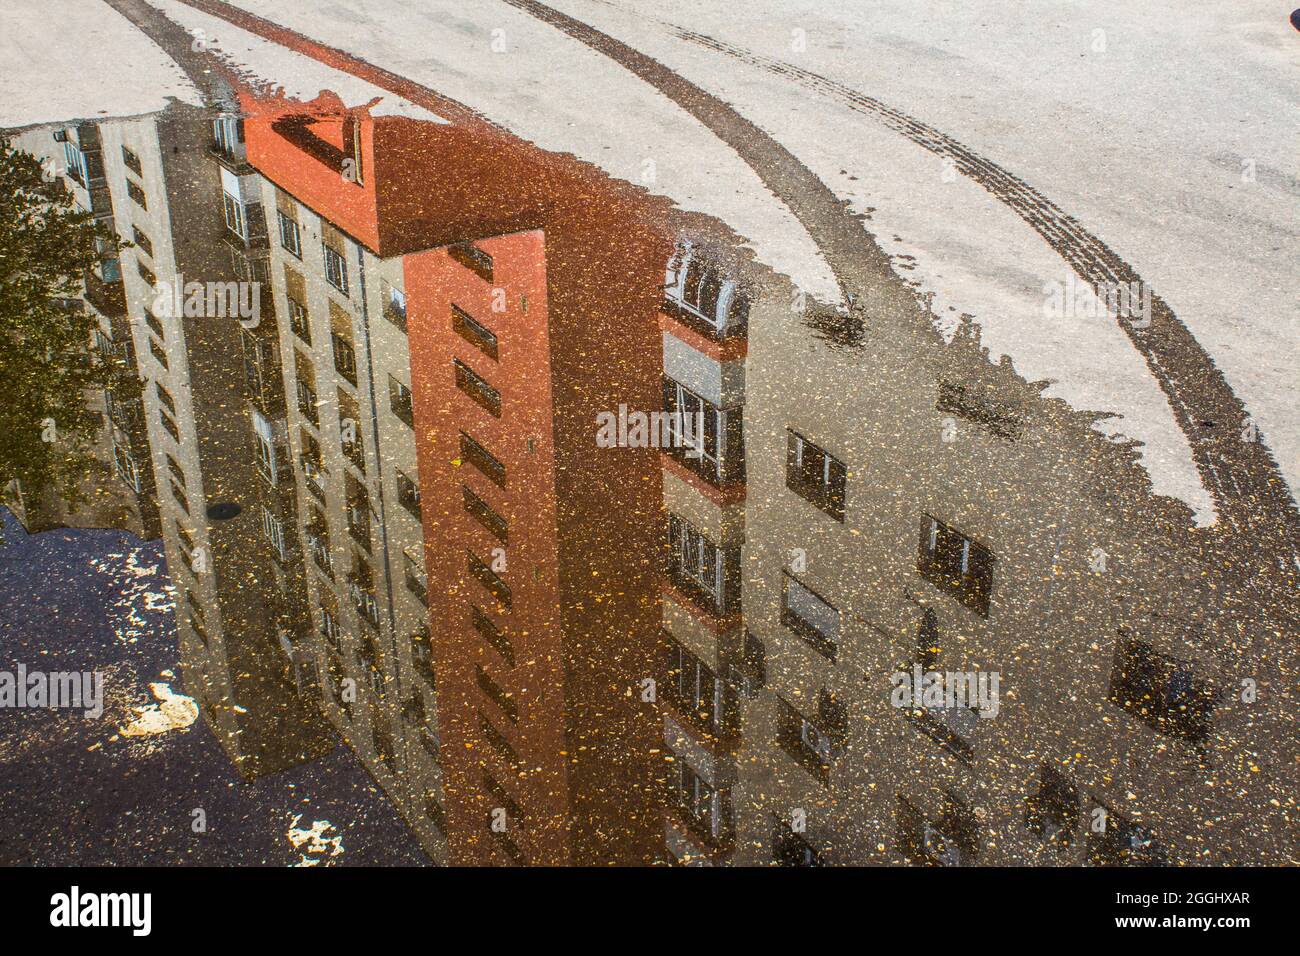 Reflexion of a block of flats building in a pond, after heavy rain in Bucharest, Romania. Stock Photo